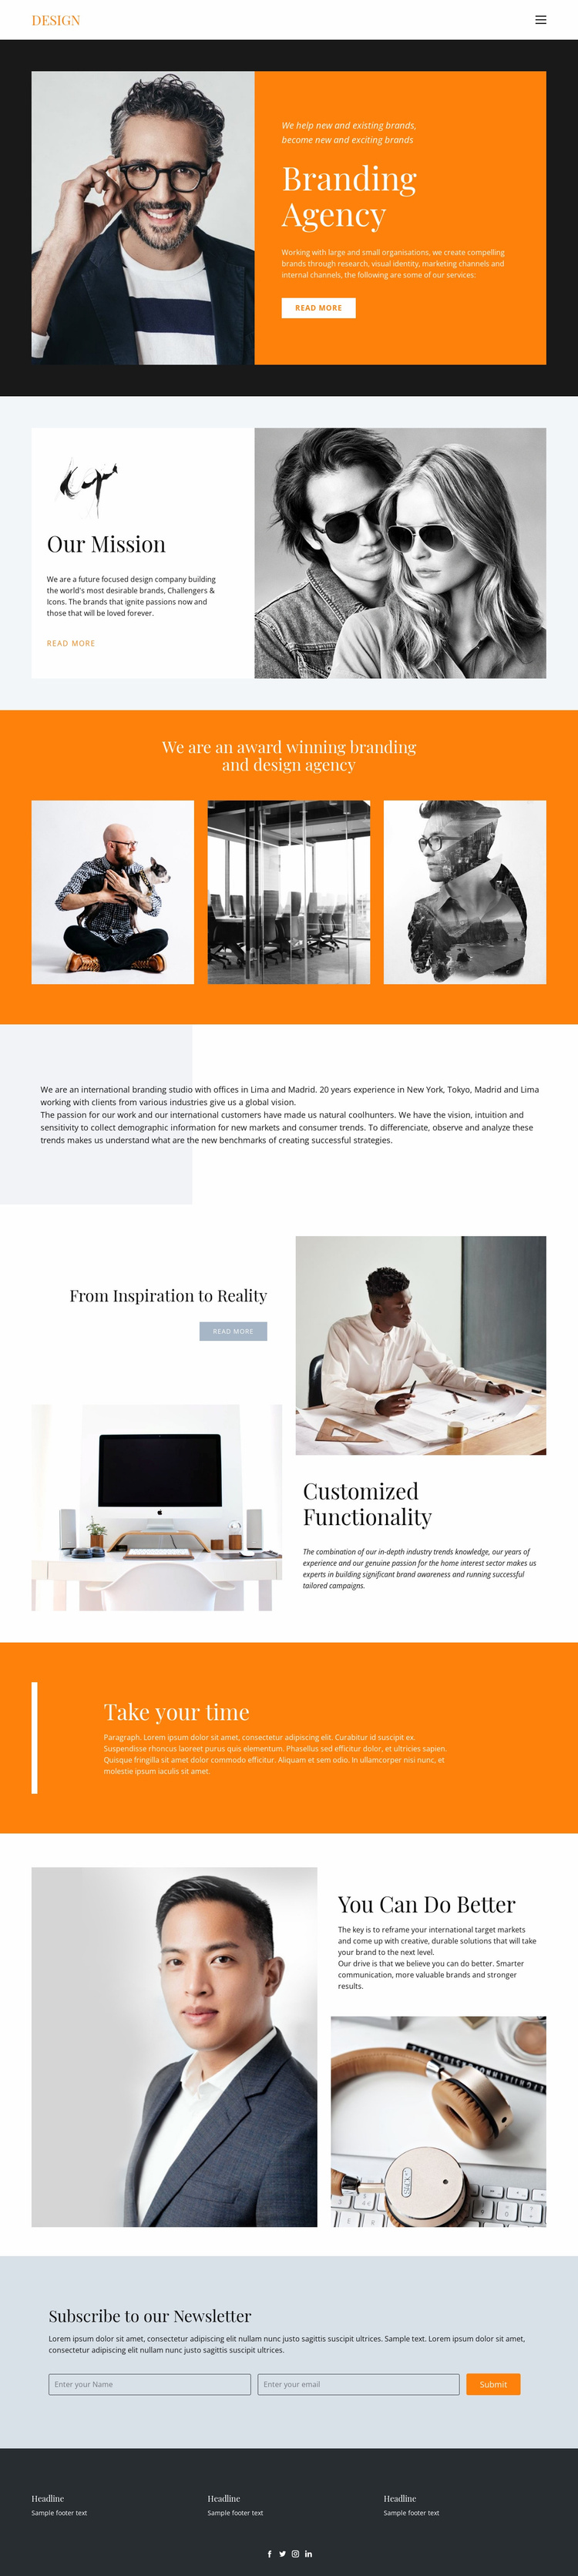 Desired results in business Website Template